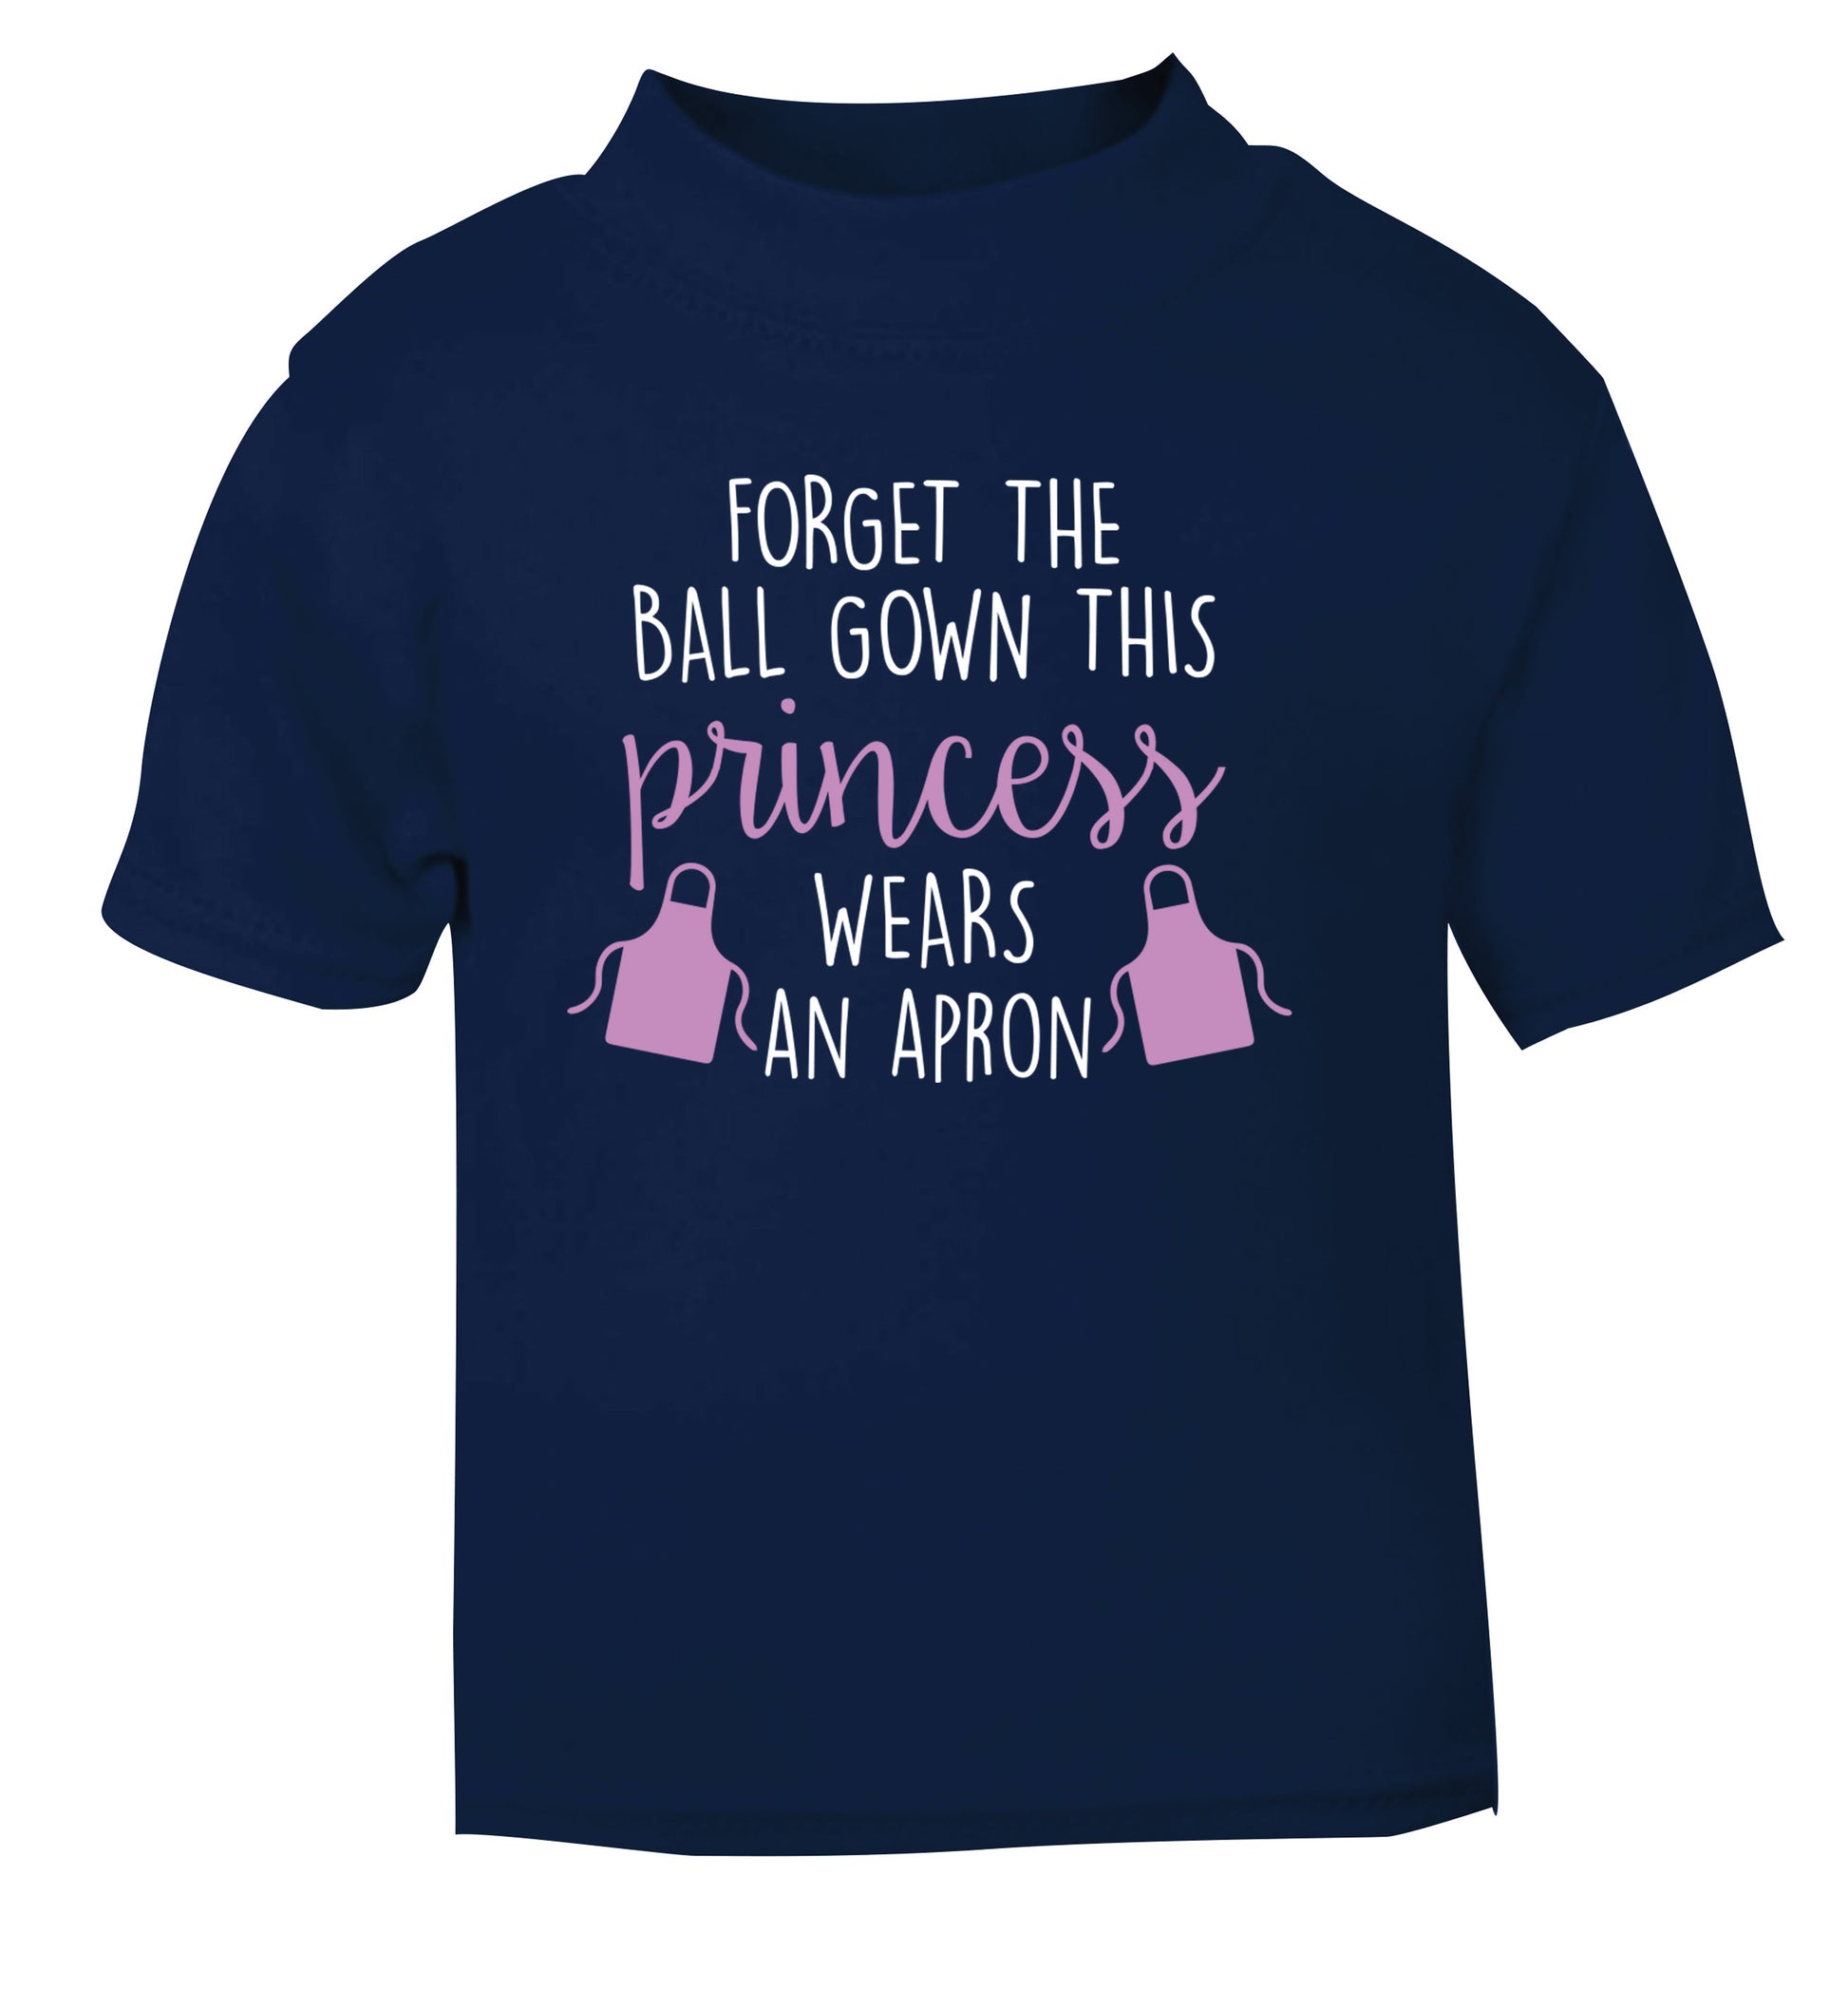 Forget the ball gown this princess wears an apron navy Baby Toddler Tshirt 2 Years